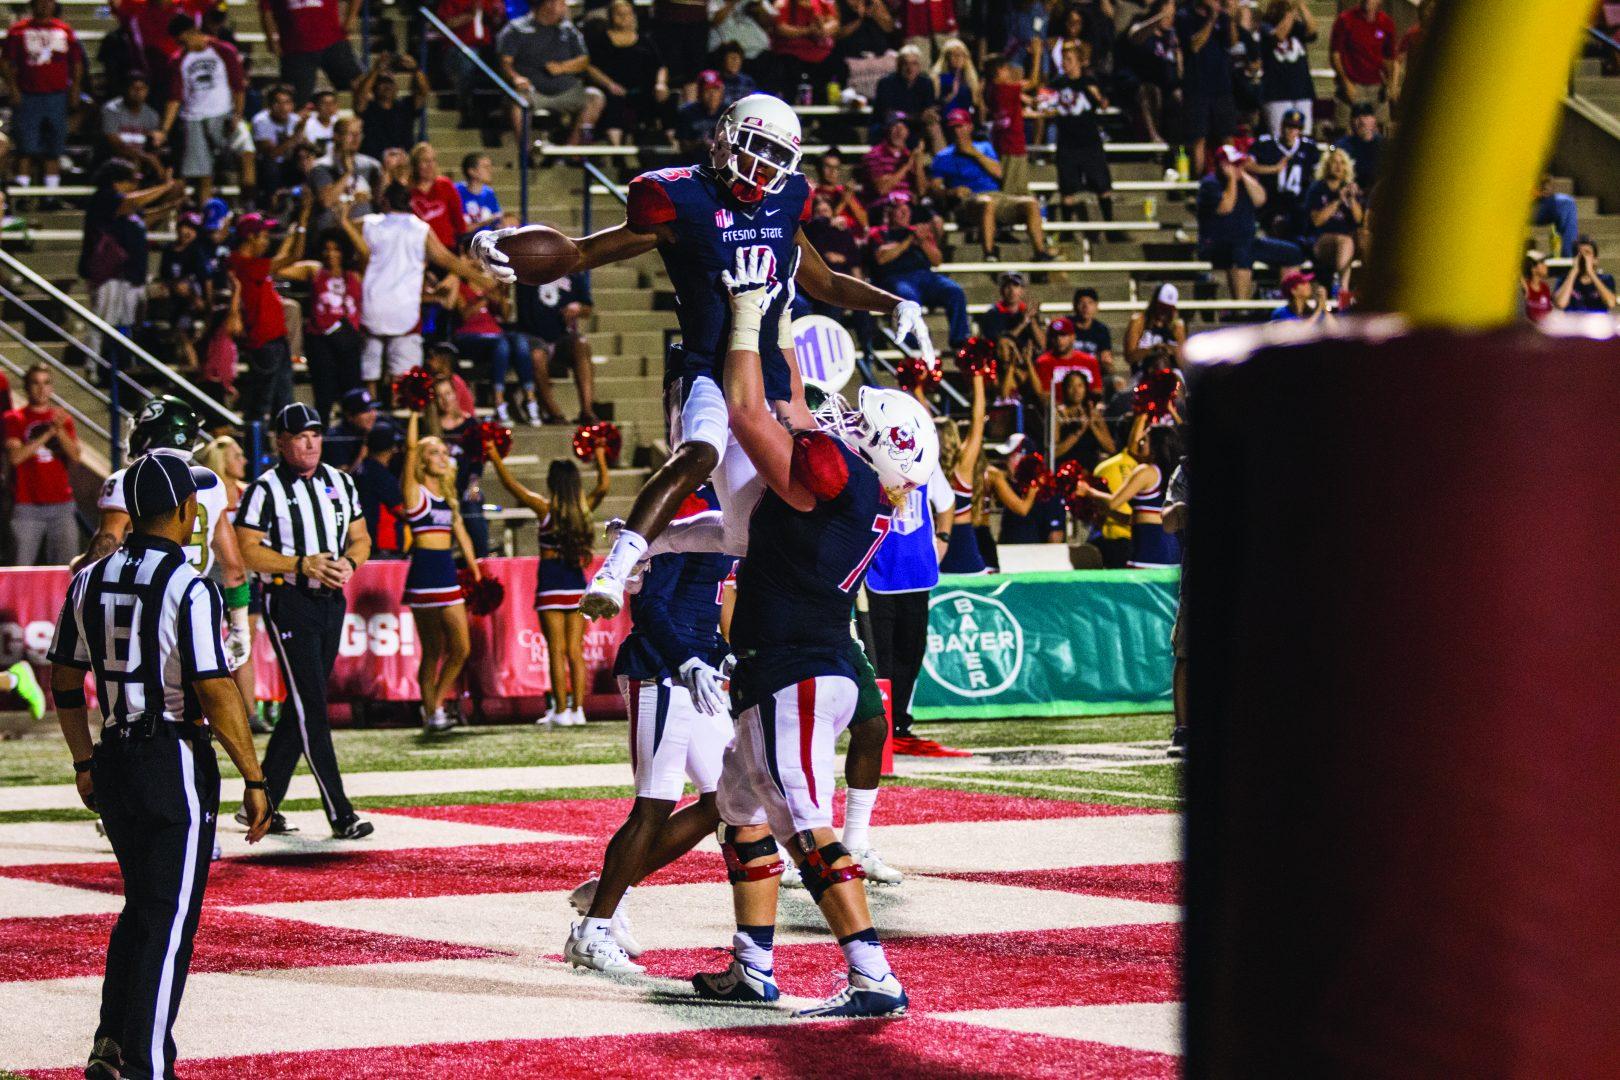 Wide receiver KeeSean Johnson (#3) celebrates in the endzone with teammates after scoring a touchdown on Saturday. (Khone Saysamongdy/The Collegian)